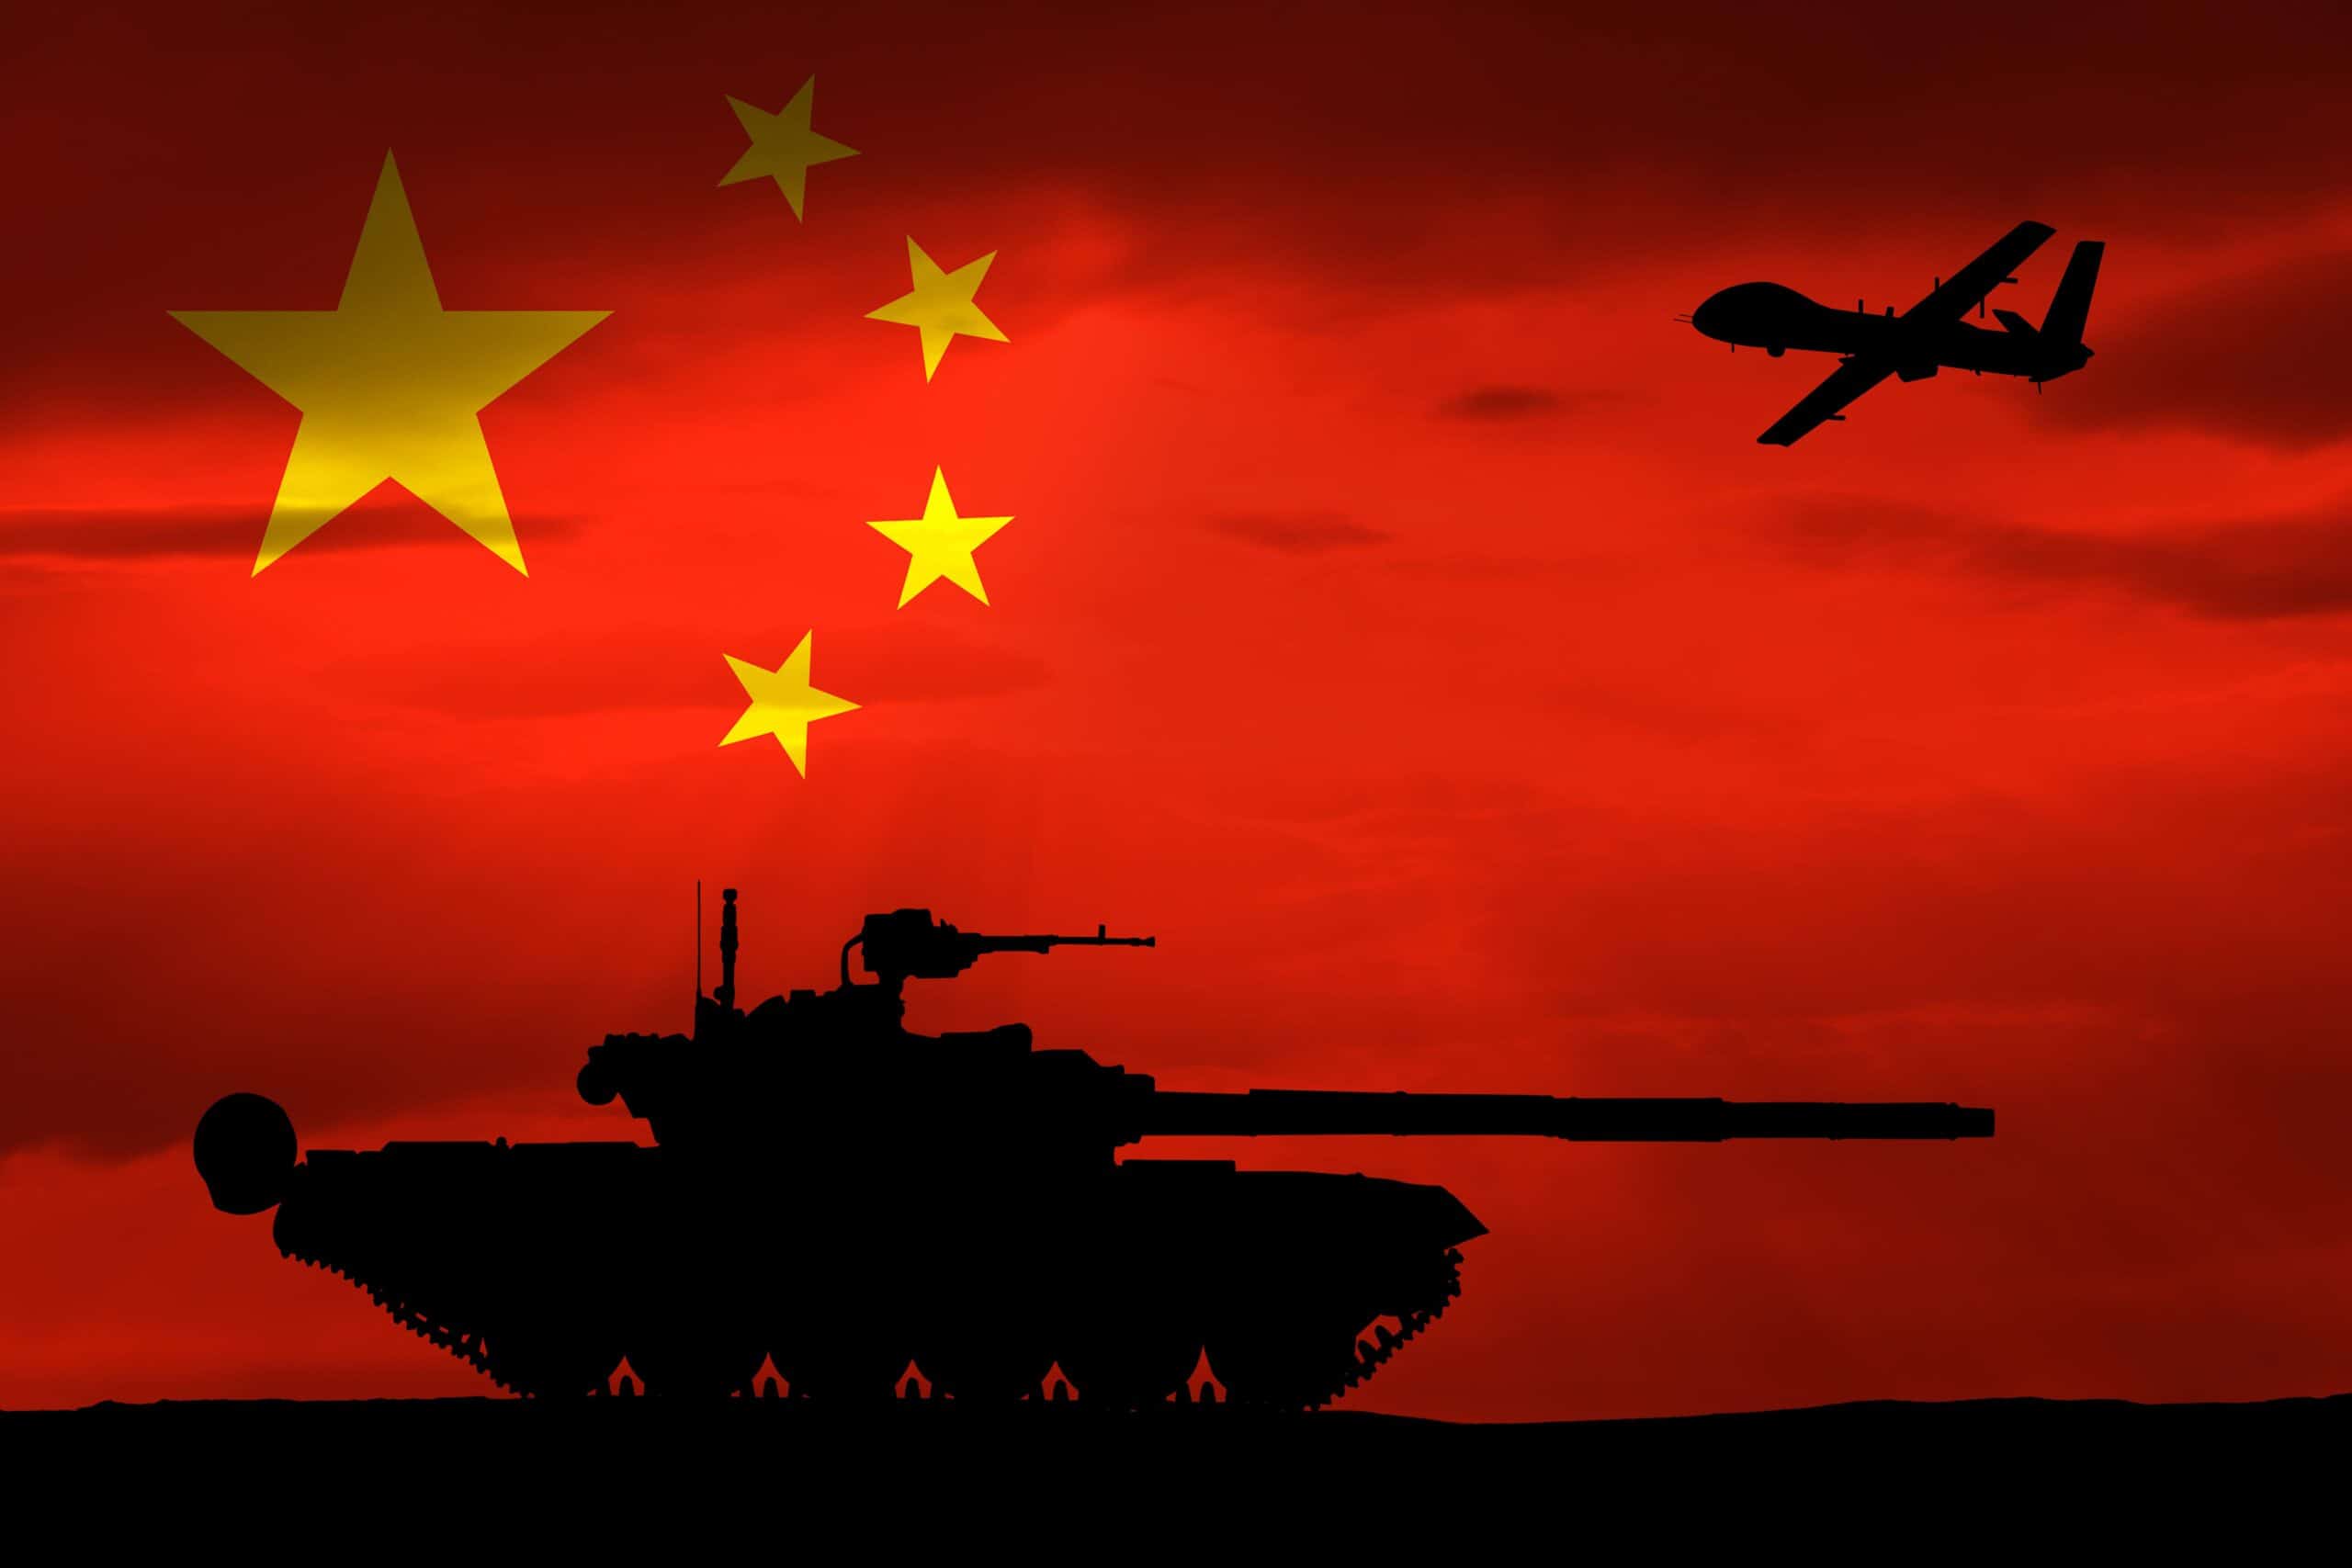 China artillery | Armored tank and combat drone on the background of the Chinese flag